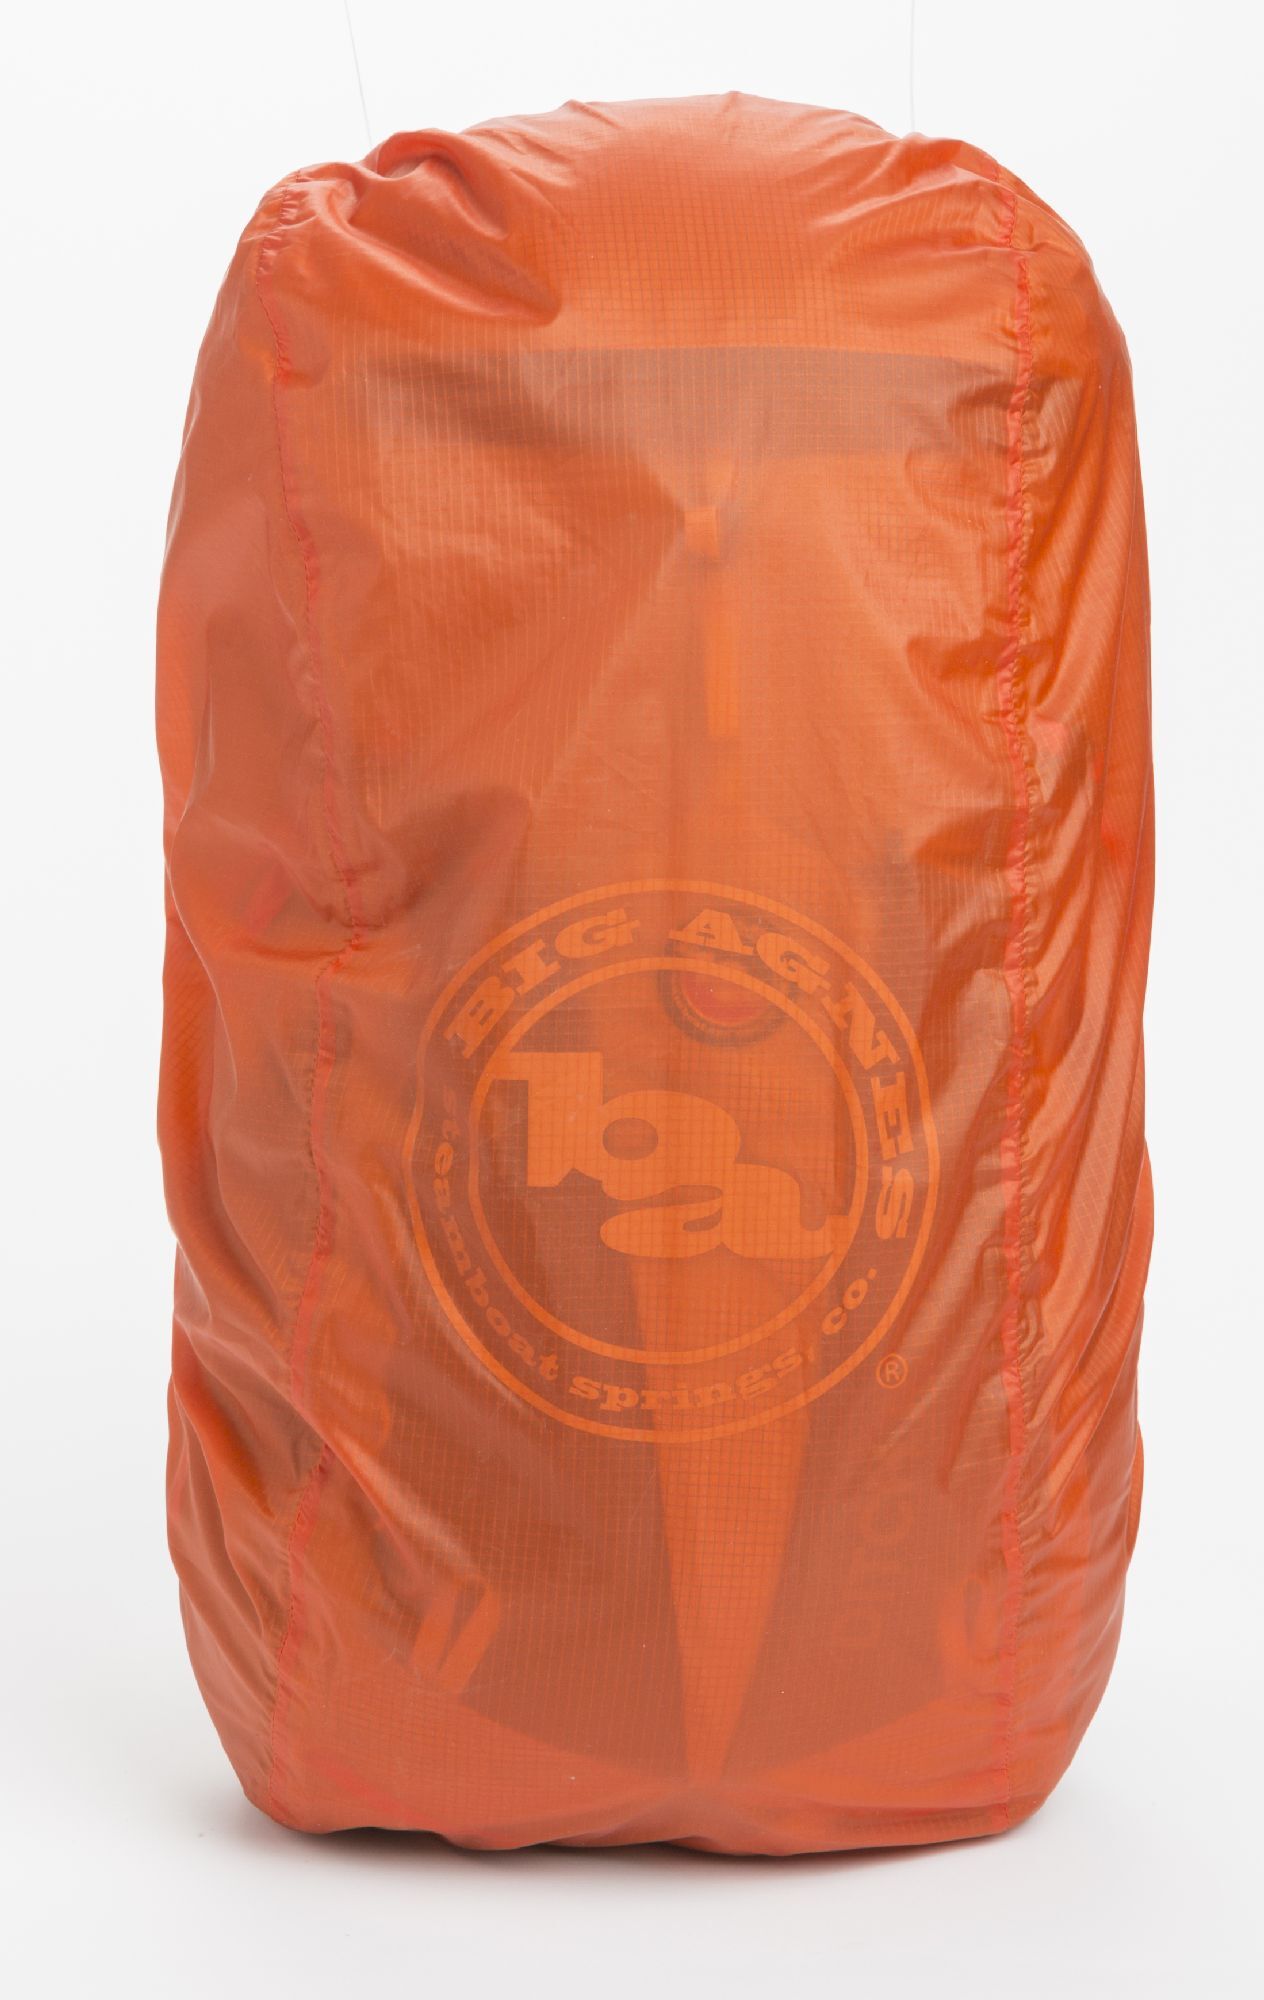 Big Agnes Pack Rain Cover Small - Protection pluie sac à dos | Hardloop